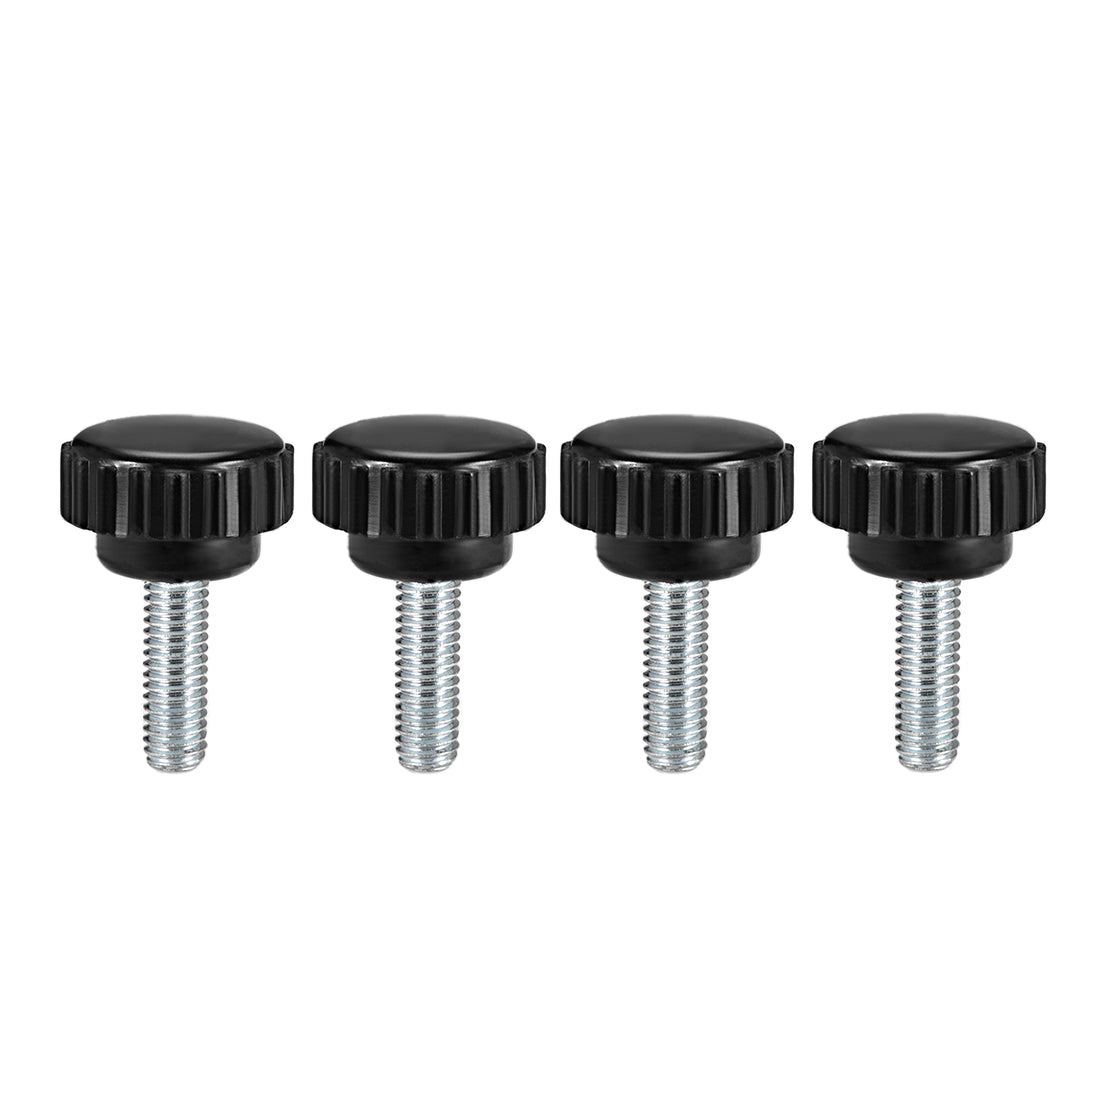 Uxcell Uxcell M6 x 44mm Male Thread Knurled Clamping Knobs Grip Thumb Screw on Type 4 Pcs